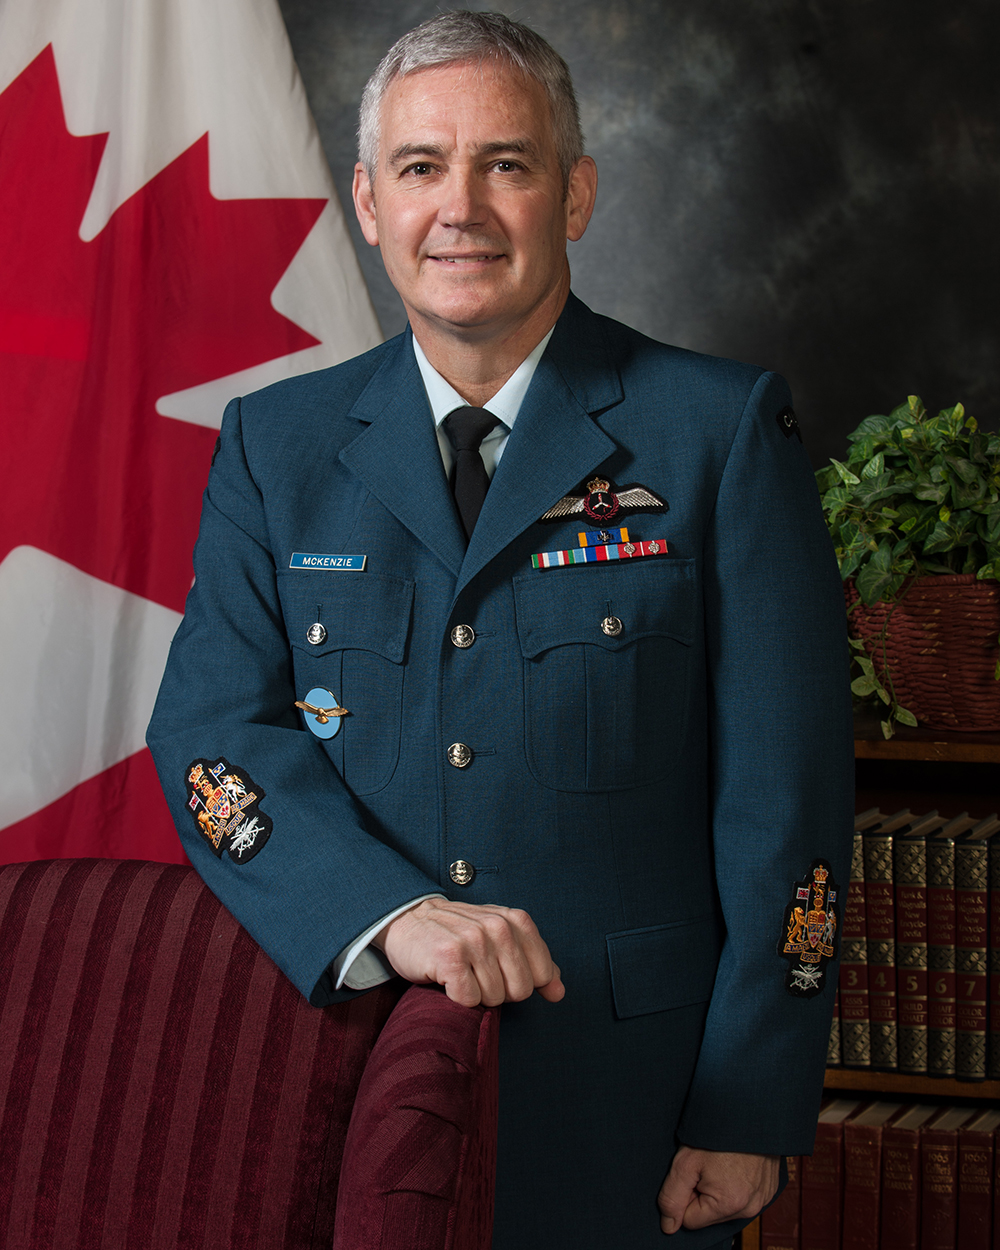 CWO Jim McKenzie is the RCAF Reserve CWO.  Joining the RCAF Reserve “may be just the beginning of many new exciting opportunities,” he says.